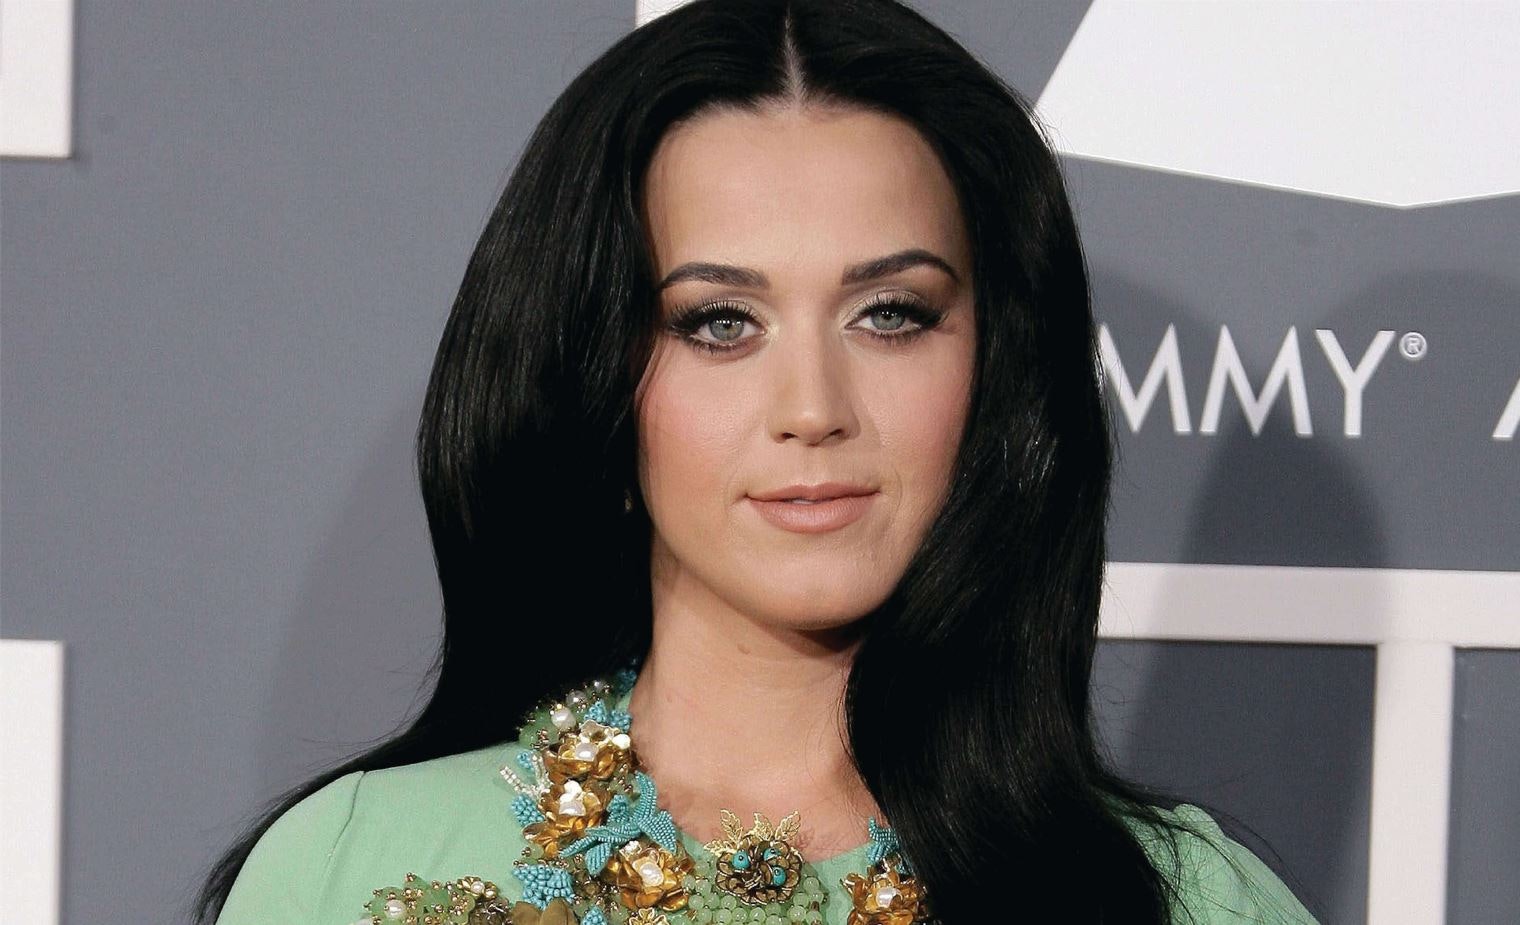 don dewey recommends katy perry vag pic